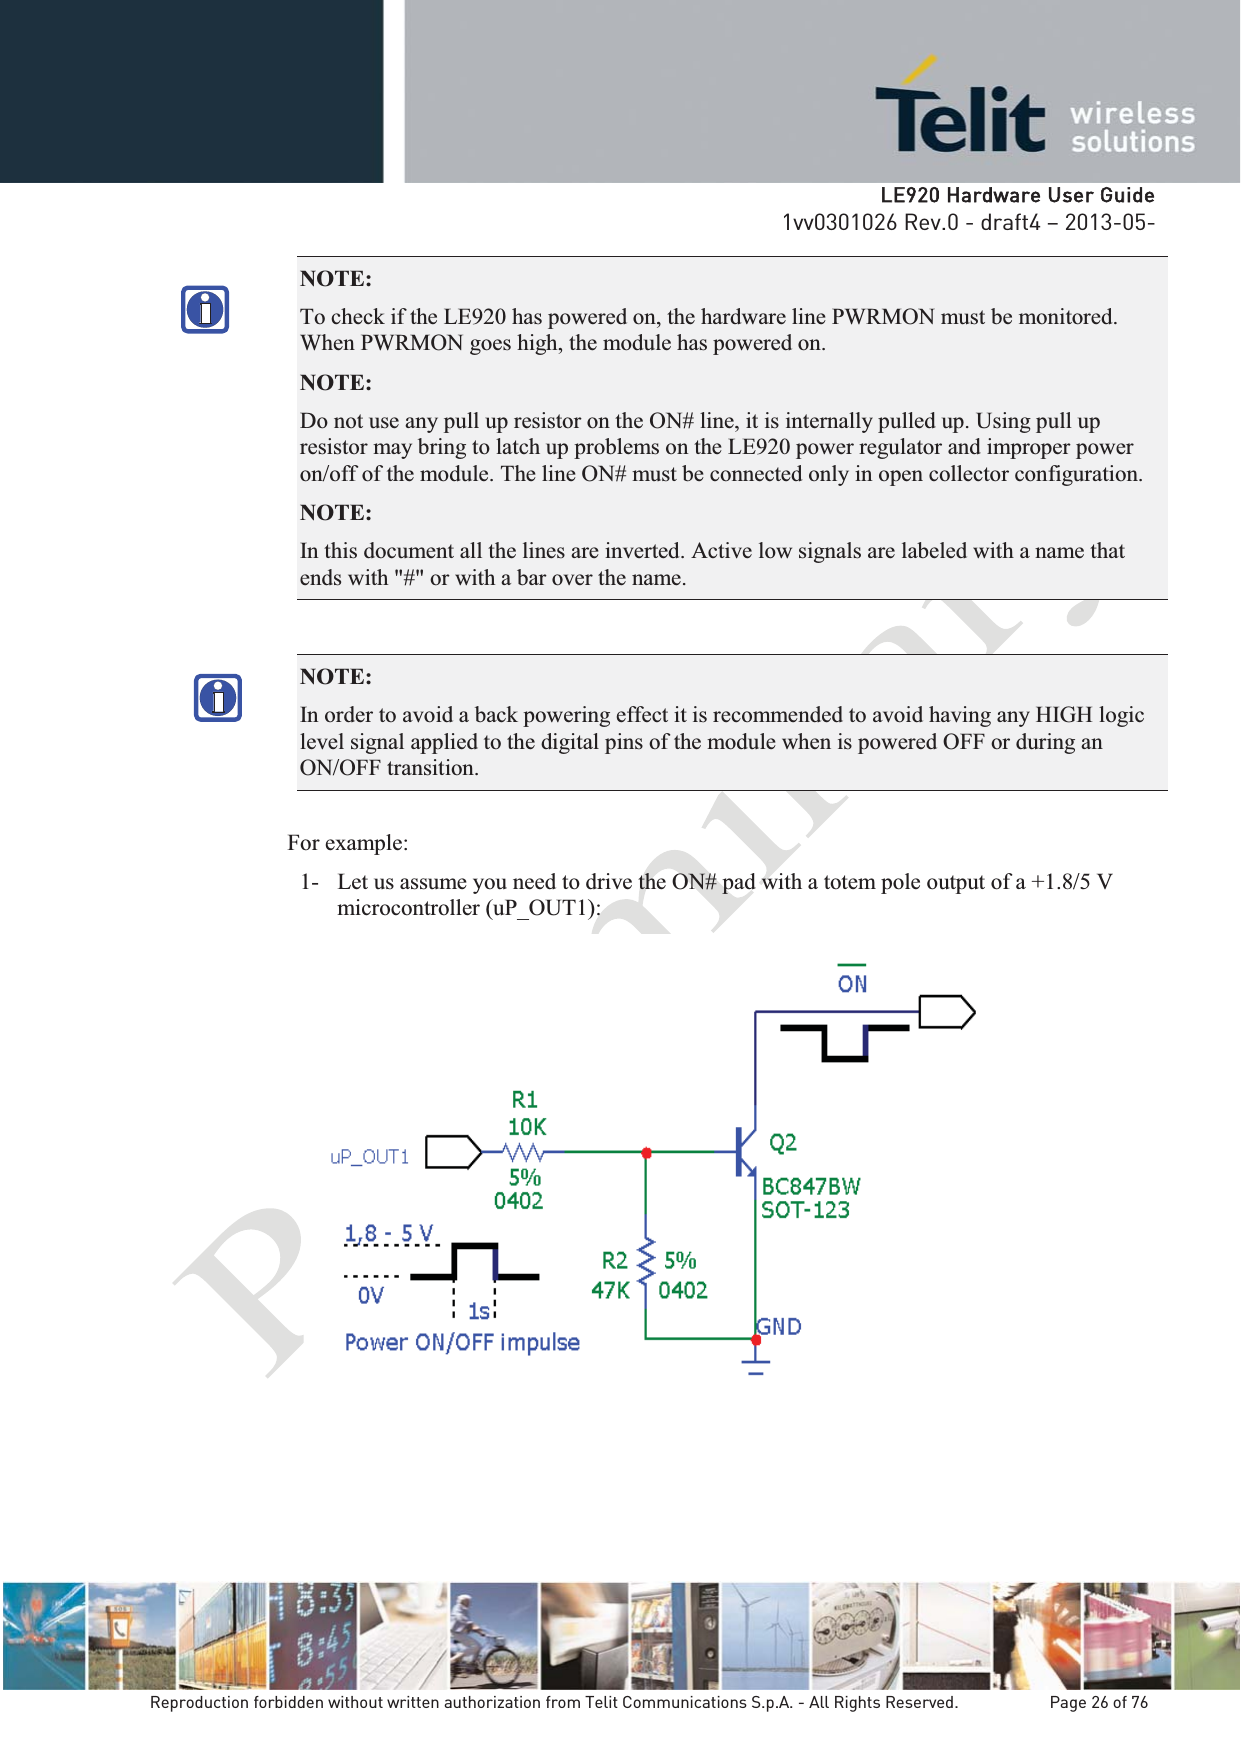   LLE920 Hardware User Guide1vv0301026 Rev.0 - draft4 – 2013-05-Reproduction forbidden without written authorization from Telit Communications S.p.A. - All Rights Reserved.    Page 26 of 76 NOTE:  To check if the LE920 has powered on, the hardware line PWRMON must be monitored. When PWRMON goes high, the module has powered on. NOTE:  Do not use any pull up resistor on the ON# line, it is internally pulled up. Using pull up resistor may bring to latch up problems on the LE920 power regulator and improper power on/off of the module. The line ON# must be connected only in open collector configuration. NOTE:  In this document all the lines are inverted. Active low signals are labeled with a name that ends with &quot;#&quot; or with a bar over the name. NOTE:  In order to avoid a back powering effect it is recommended to avoid having any HIGH logic level signal applied to the digital pins of the module when is powered OFF or during an ON/OFF transition. For example: 1- Let us assume you need to drive the ON# pad with a totem pole output of a +1.8/5 V microcontroller (uP_OUT1):    